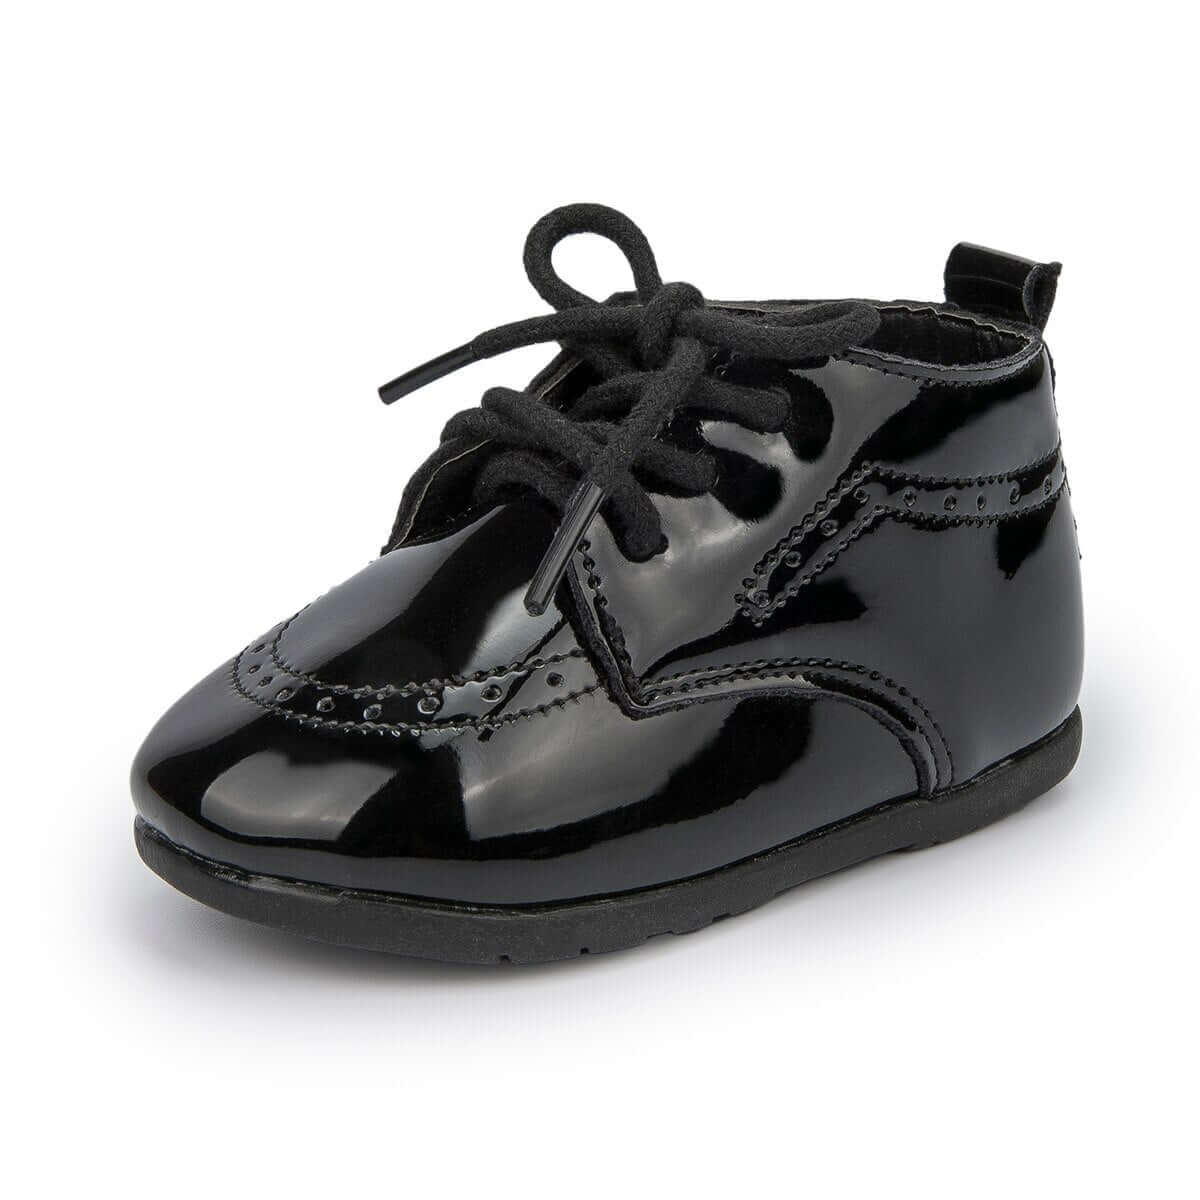 Baby High Top Leather Shoes Baby High Top Leather Shoes Baby Bubble Store Black Gloss 7-12 Months 